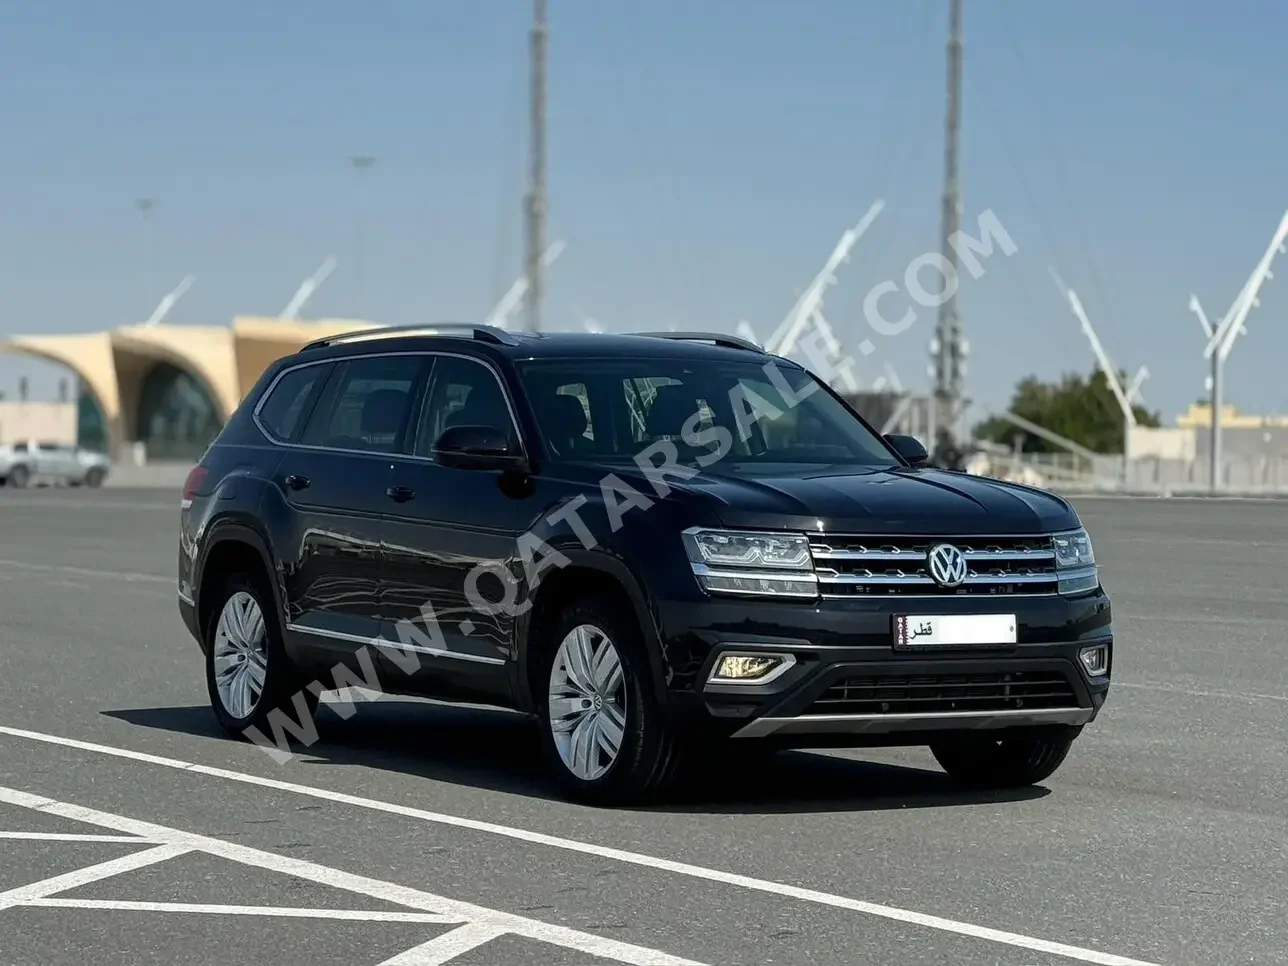 Volkswagen  Teramont  2019  Automatic  69,000 Km  6 Cylinder  Four Wheel Drive (4WD)  SUV  Black  With Warranty